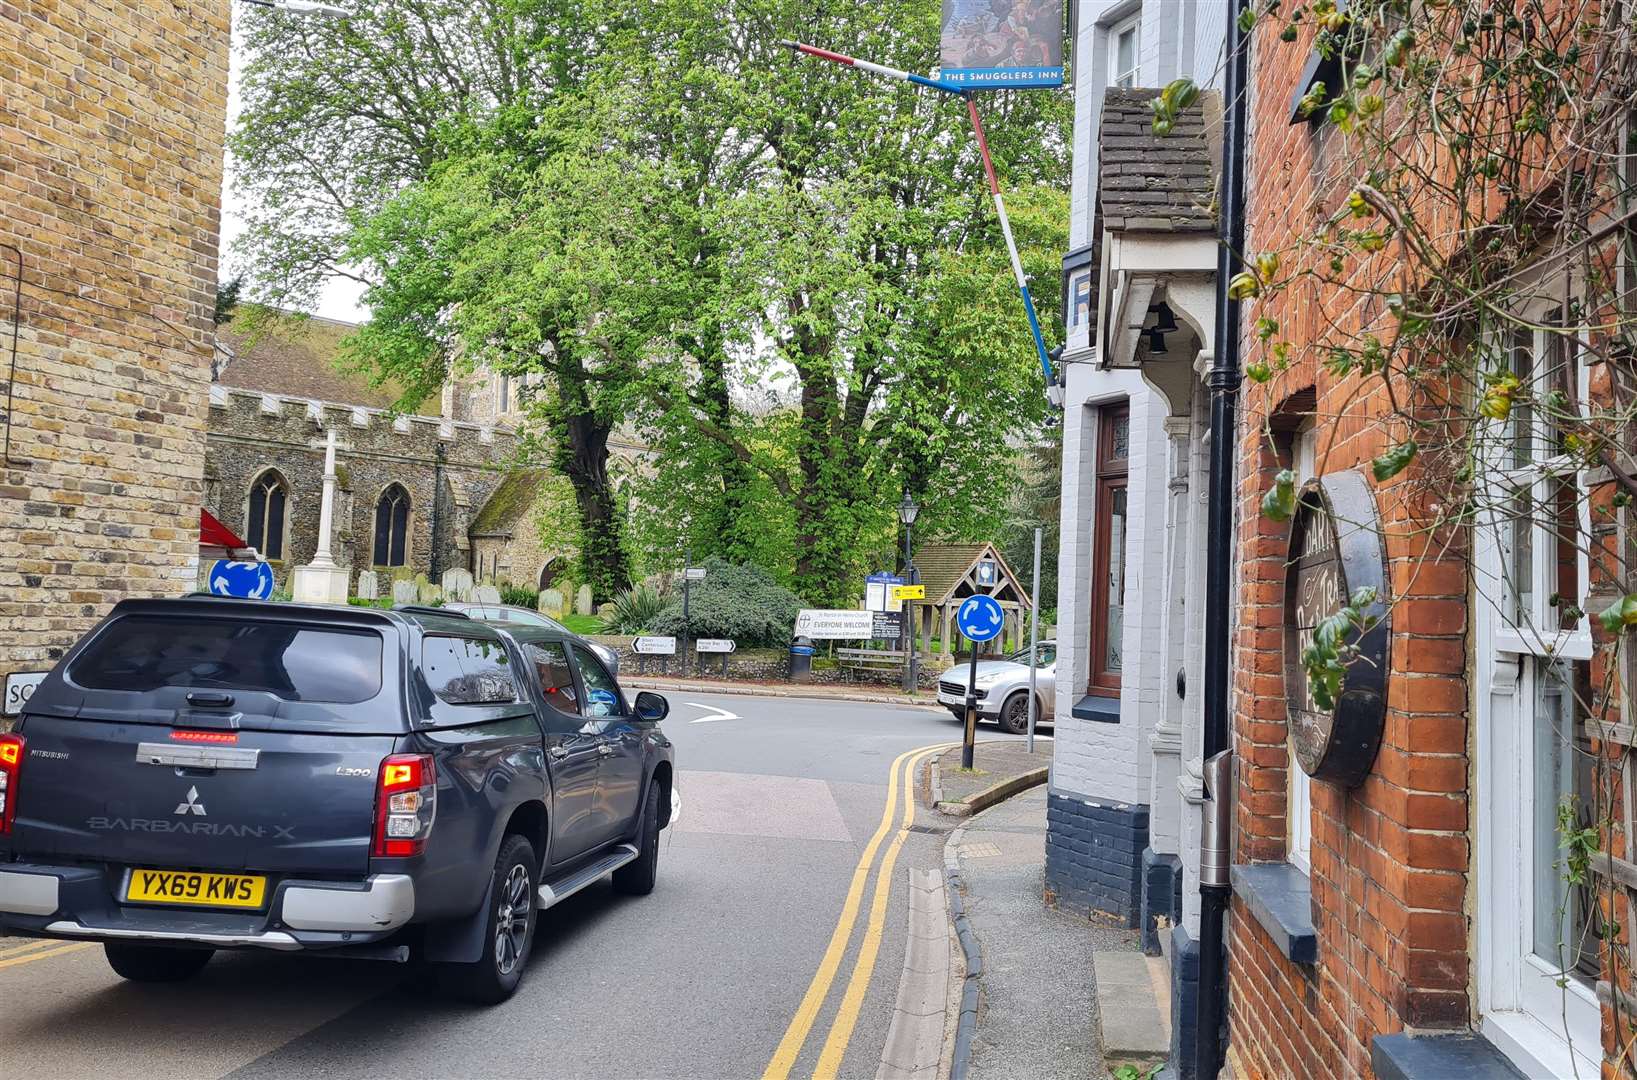 Narrow roads with double yellow lines mean the School Lane car park is a vital amenity